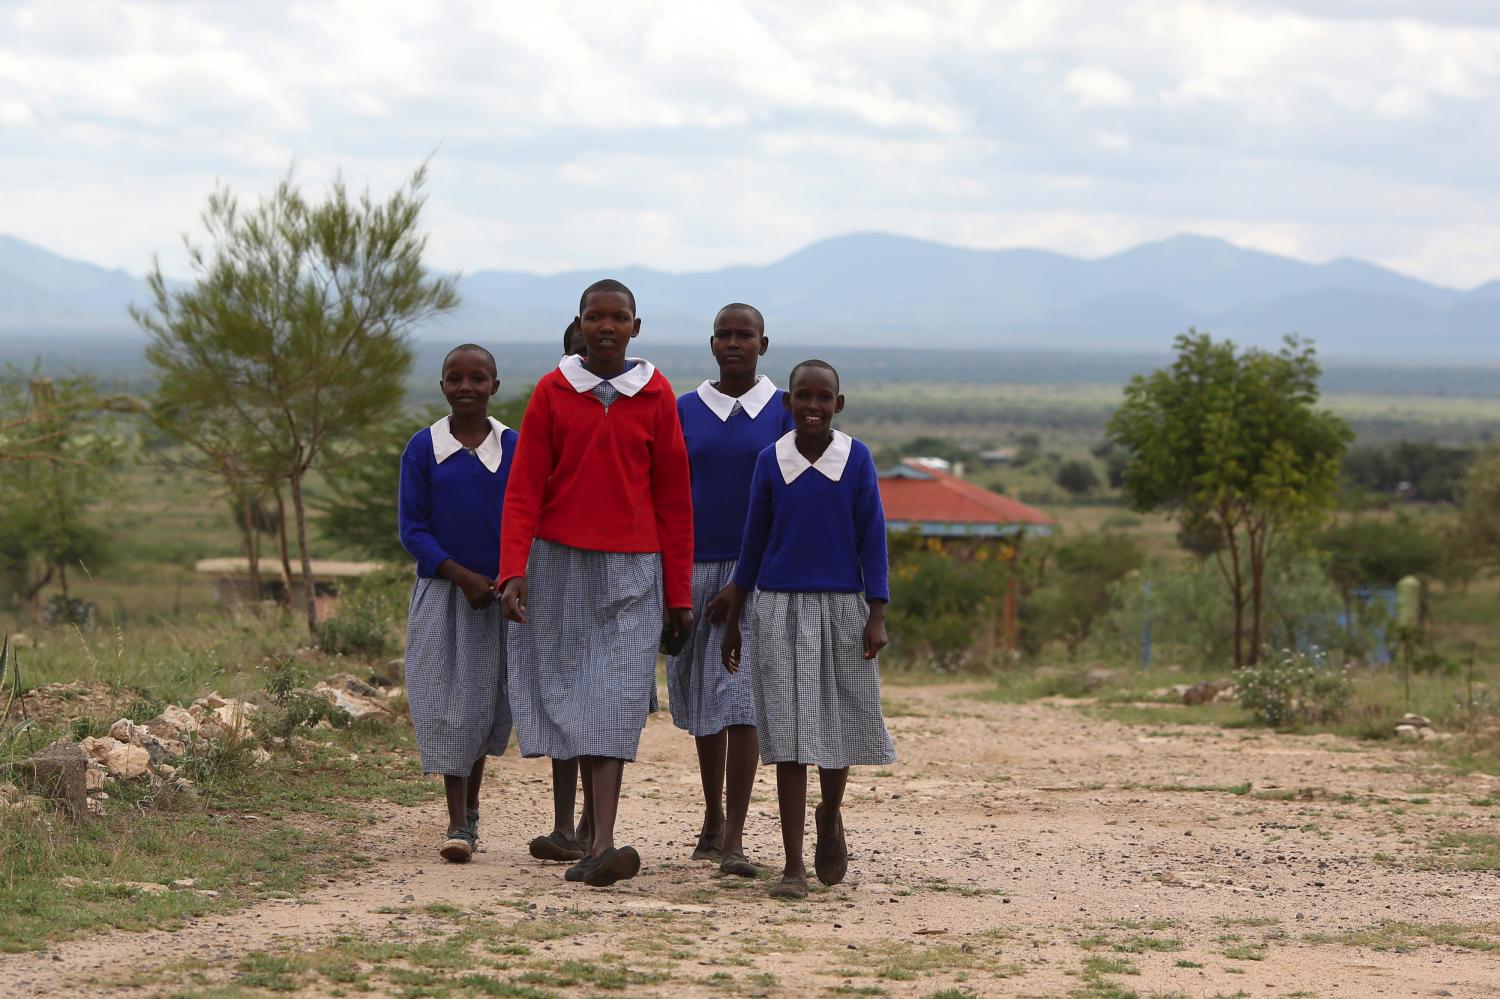 Students arrive at the start of a social event advocating against harmful practices such as Female Genital Mutilation (FGM) at the Imbirikani Girls High School in Imbirikani, Kenya, April 21, 2016. REUTERS/Siegfried Modola - GF10000390972